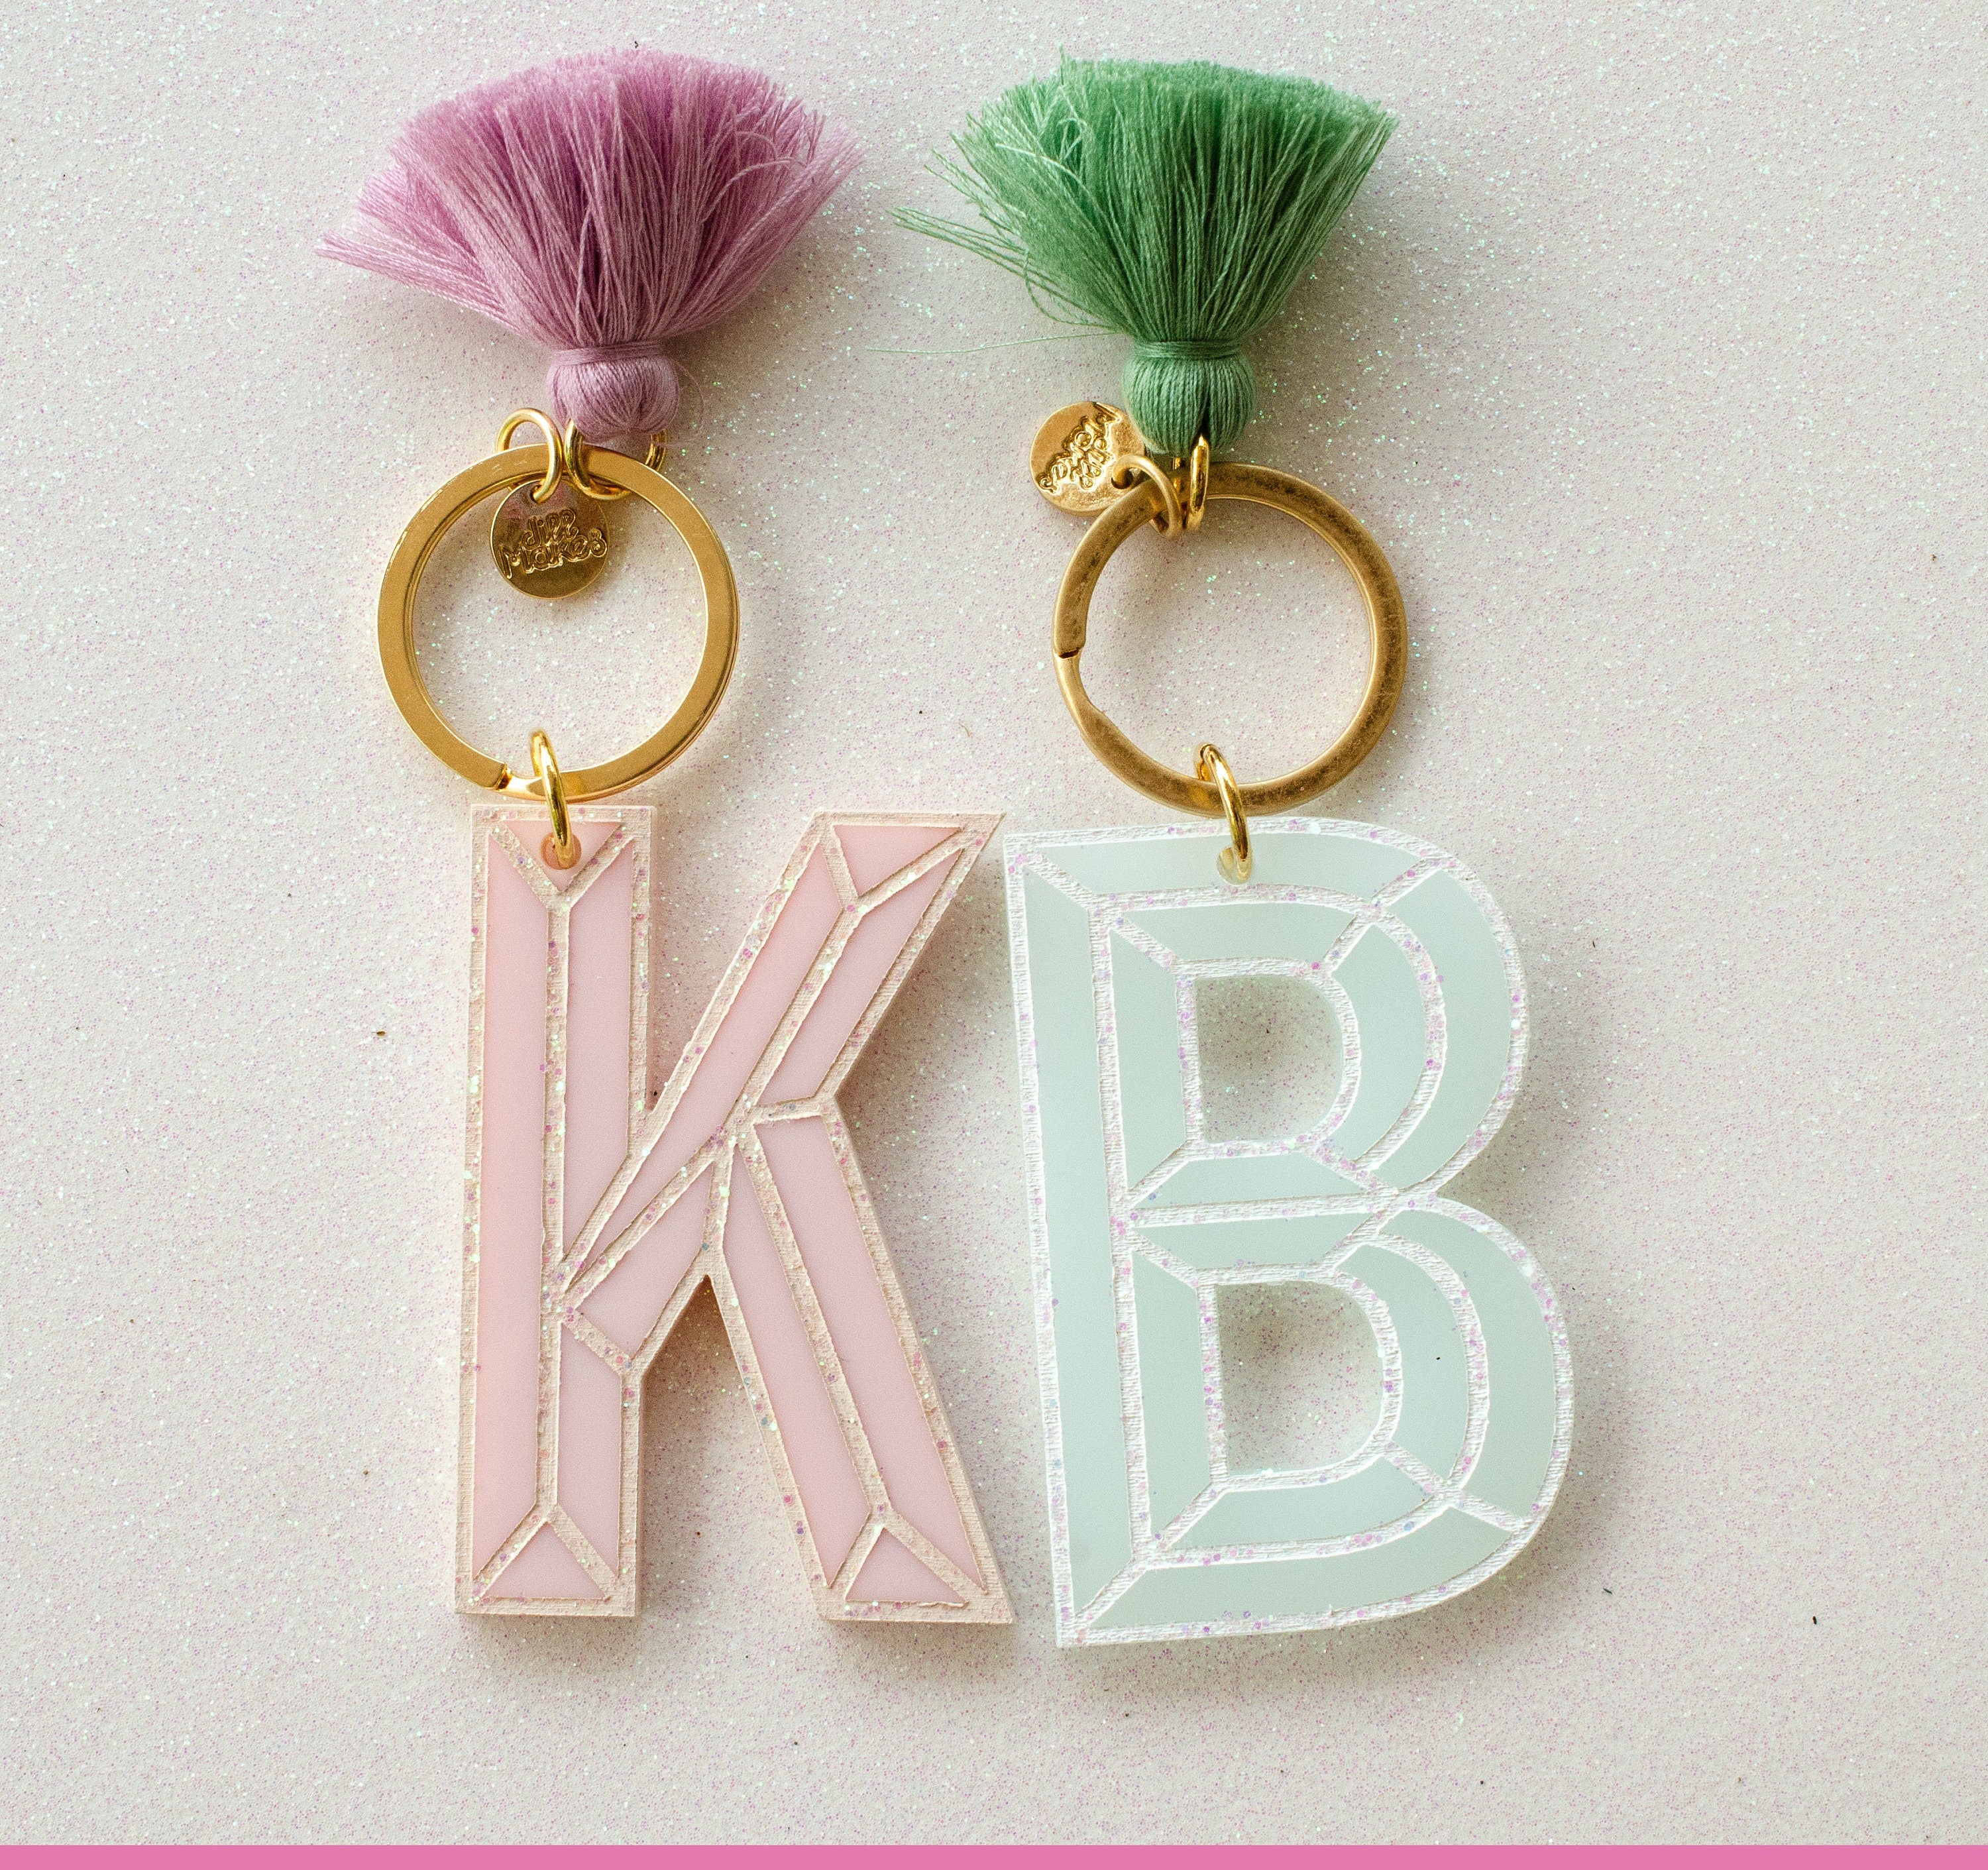 Personalized Monogram Key Chain, Gift for Women, Name